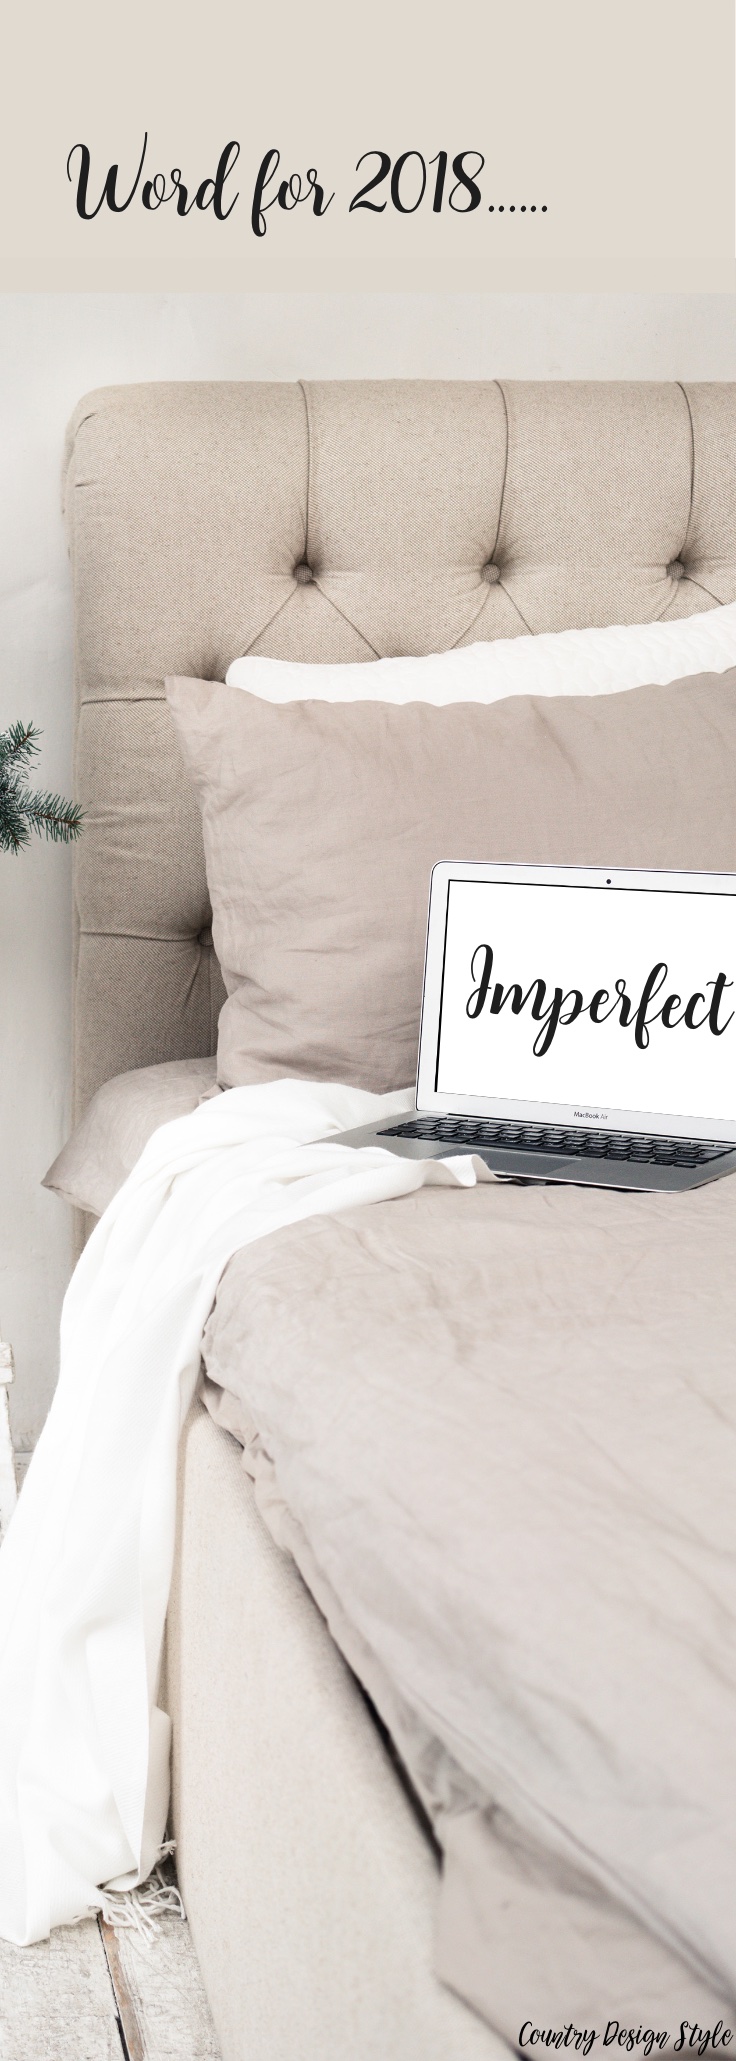 My word for 2018 is Imperfect. Reaching goals imperfectly. | Country Design Style | countrydesignstyle.com 